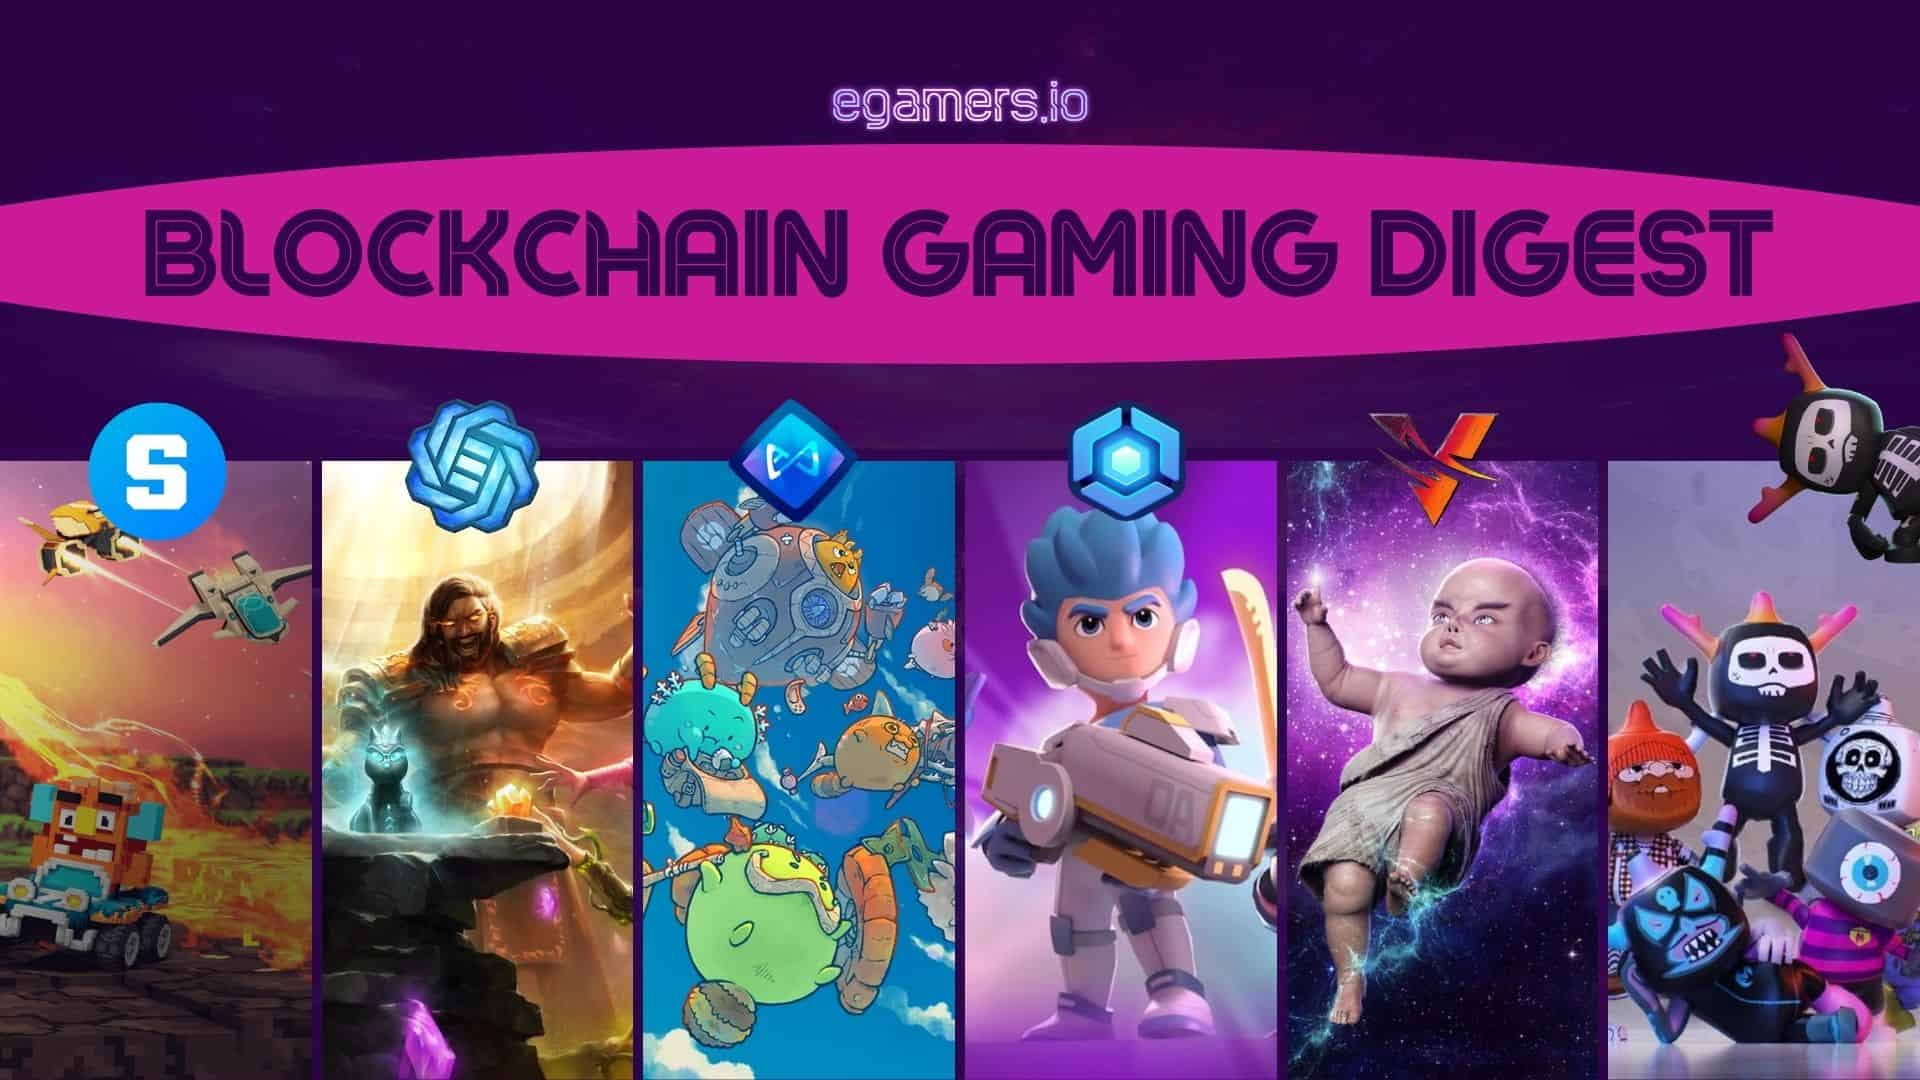 The blockchain gaming digest